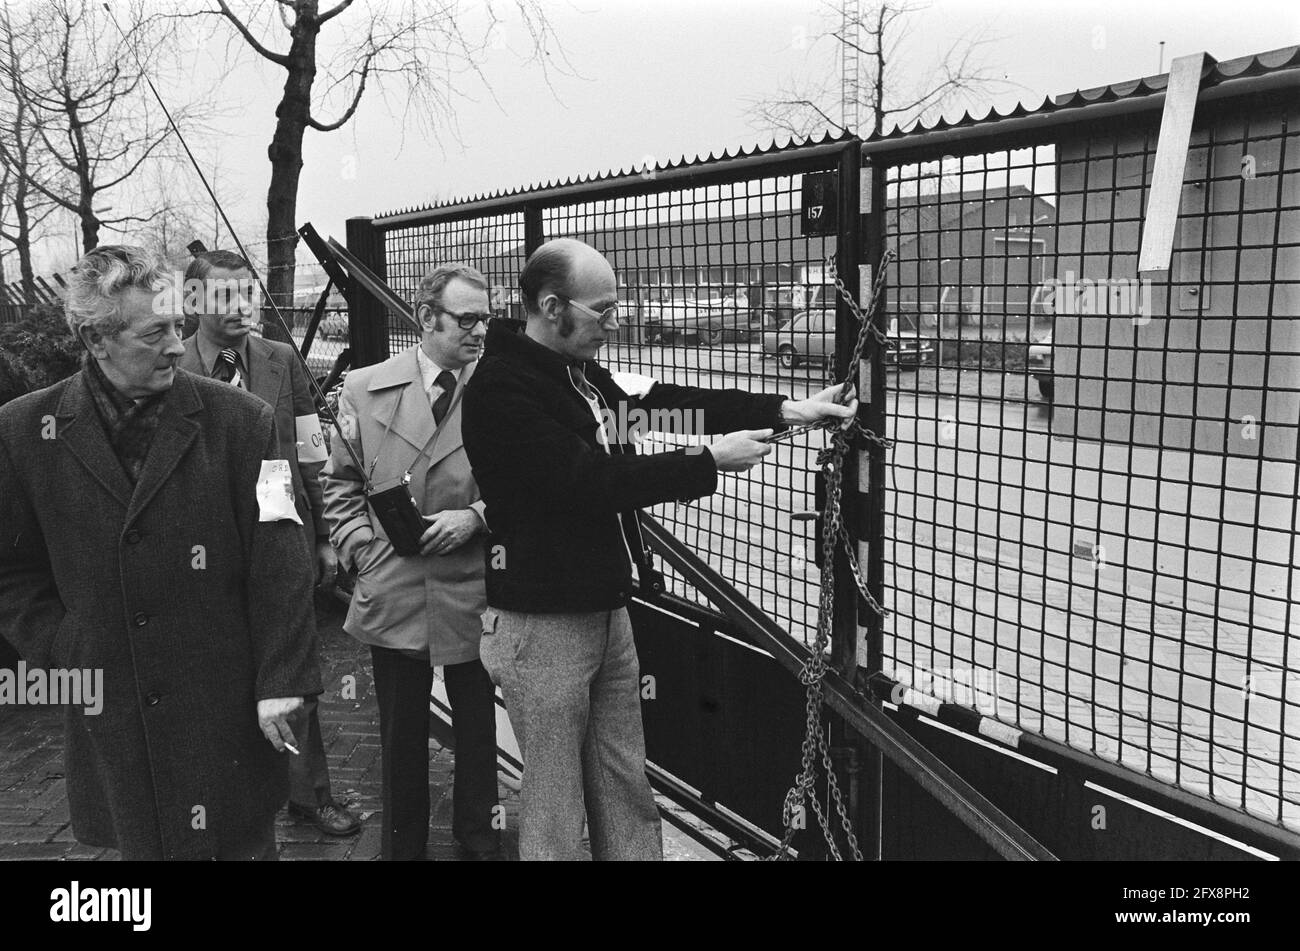 Occupation of Tealtronic; after the appearance of a bailiff, the gates were closed with large chains, January 10, 1977, OCCUPATION, Gates, The Netherlands, 20th century press agency photo, news to remember, documentary, historic photography 1945-1990, visual stories, human history of the Twentieth Century, capturing moments in time Stock Photo